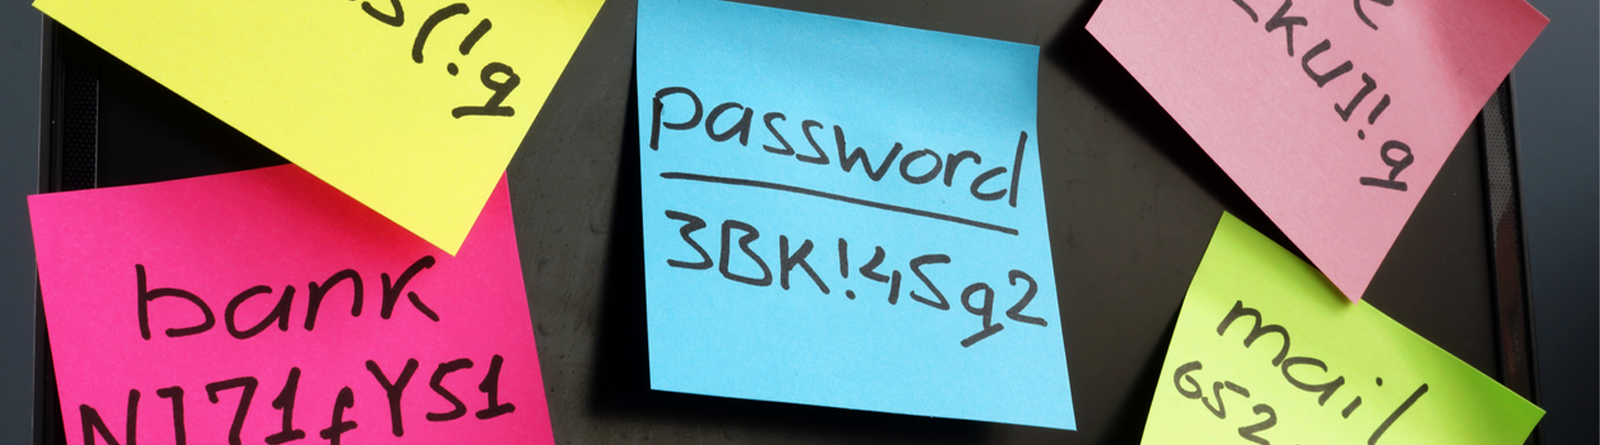 sticky notes with passwords written on them